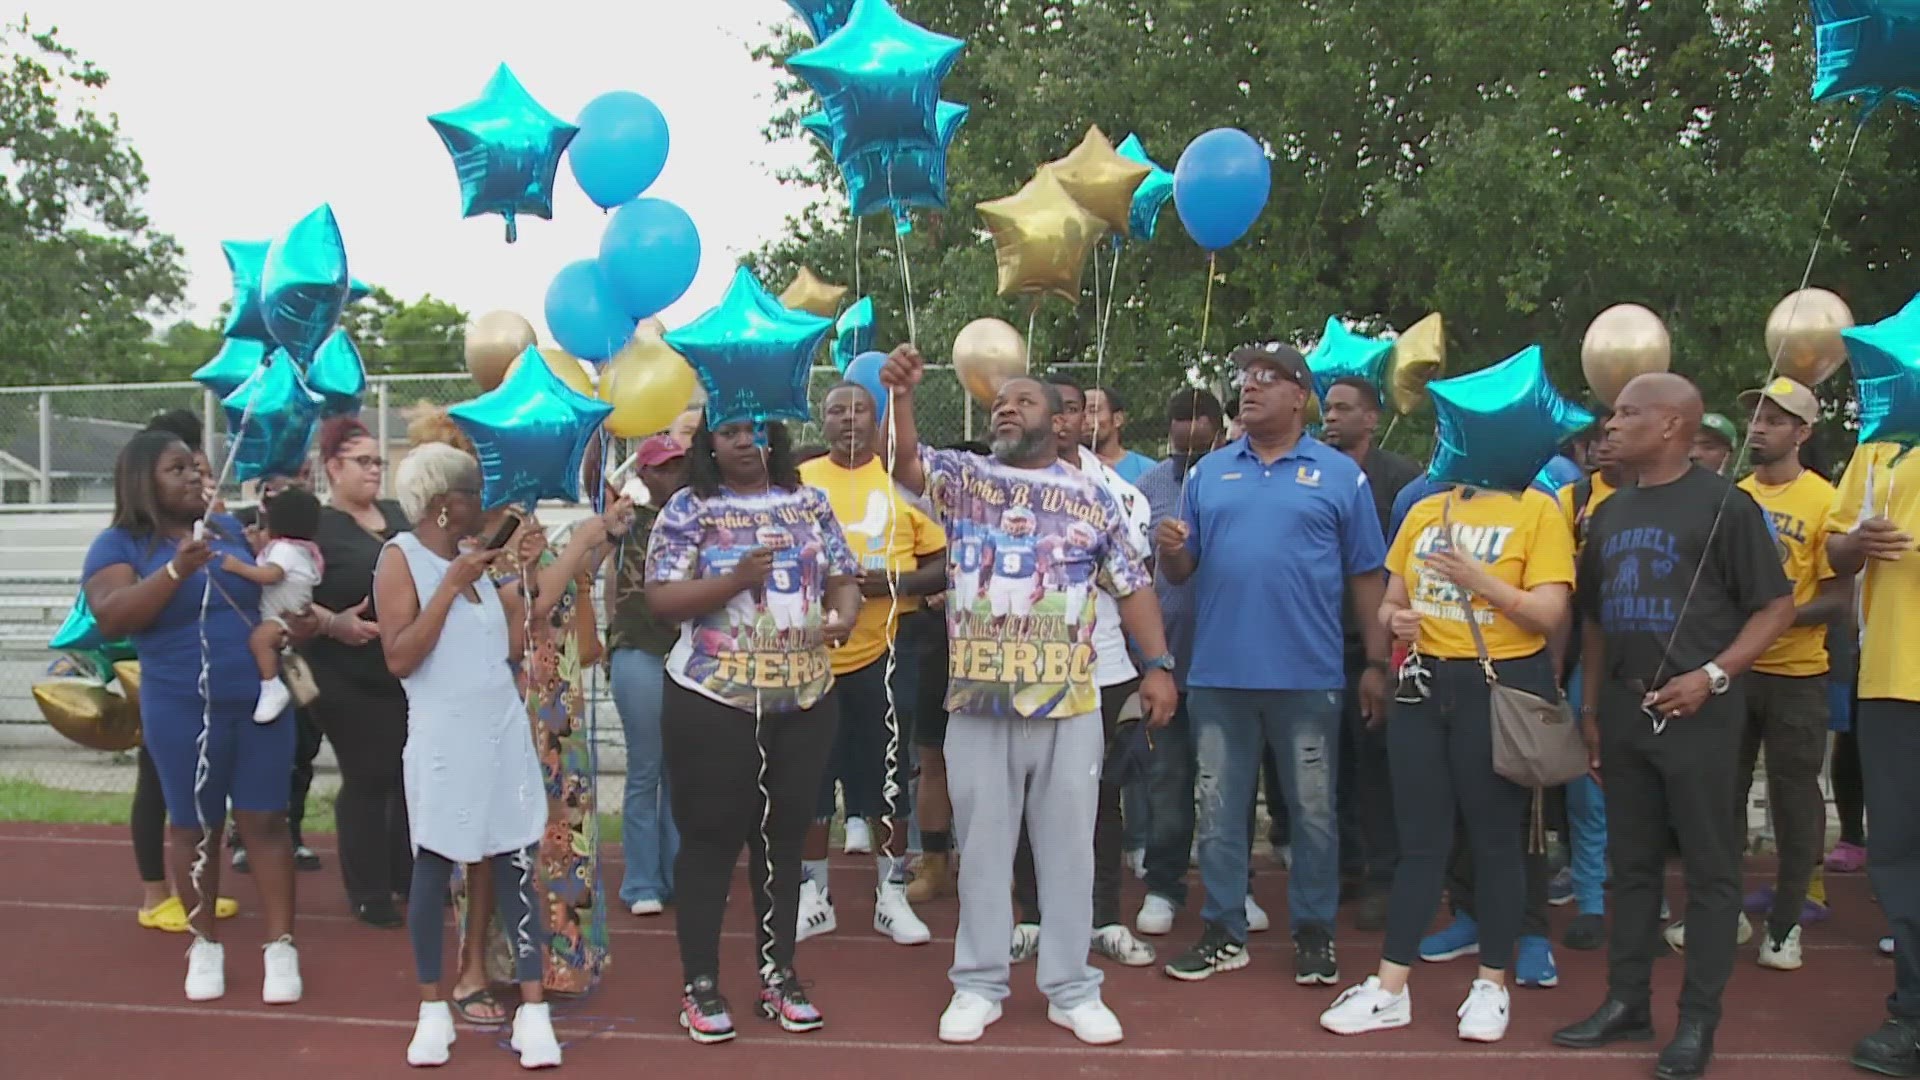 Community members honored Hilbert Walker III, the young man who was shot and killed while working his shift.